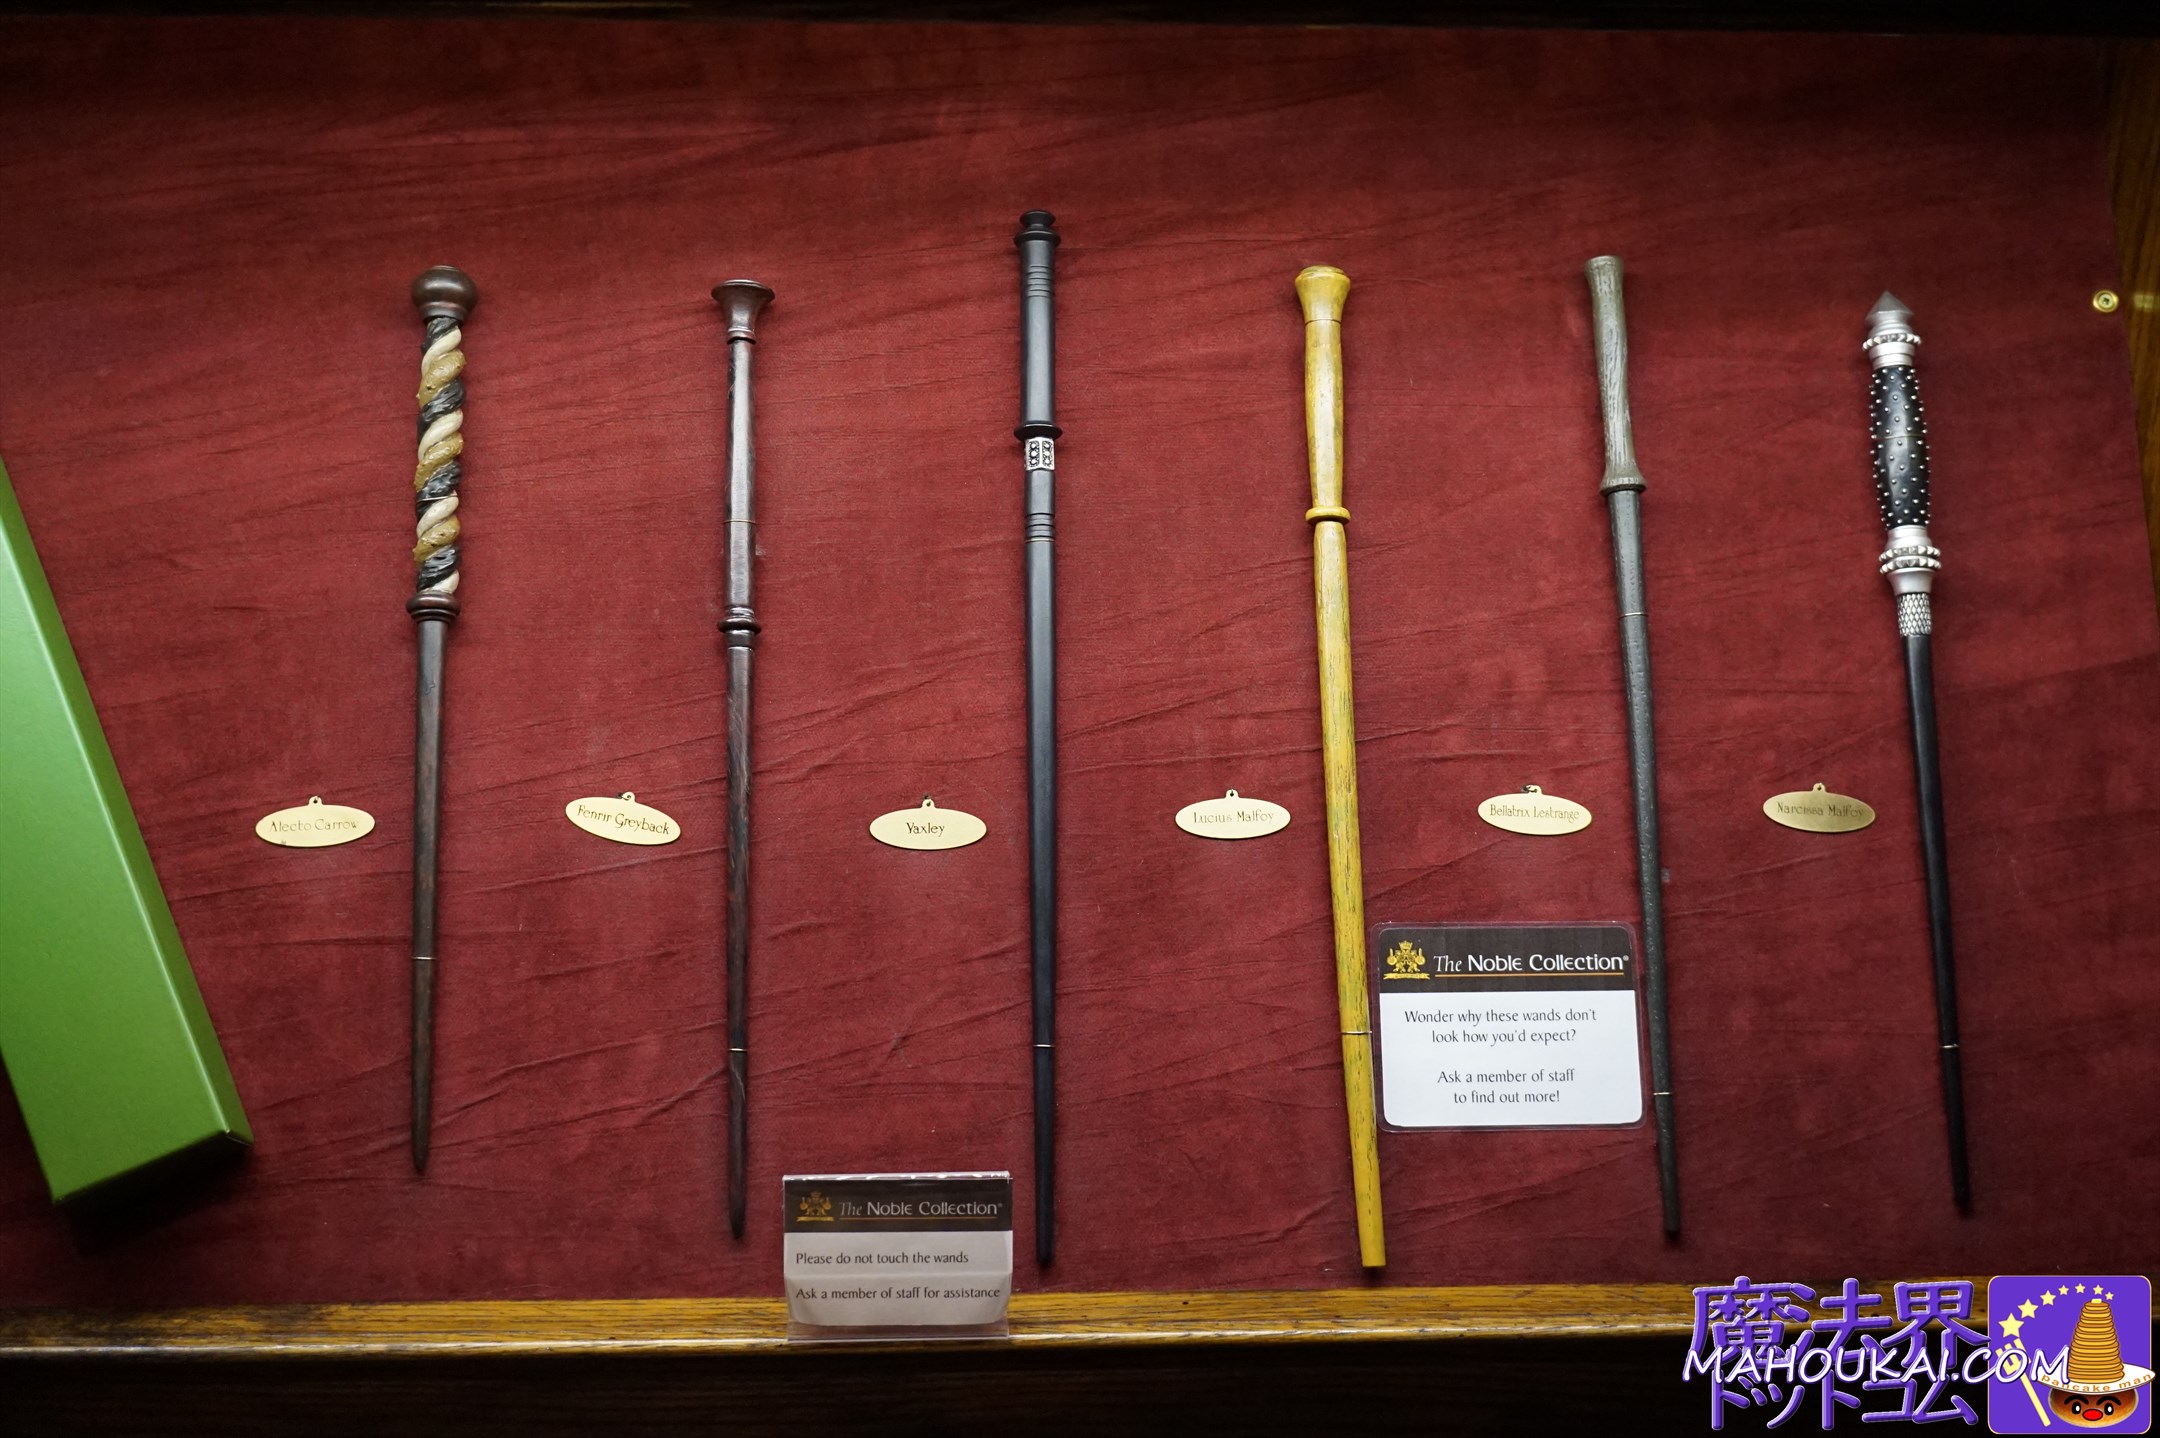 Alecto Carrow, Fenrir Greyback, Yaxley, Lucius Malfoy, Bellatrix Lestrange and Narcissa Malfoy wands The Noble Collection Covent Garden Shop, Harry Potter replica merchandise, London.